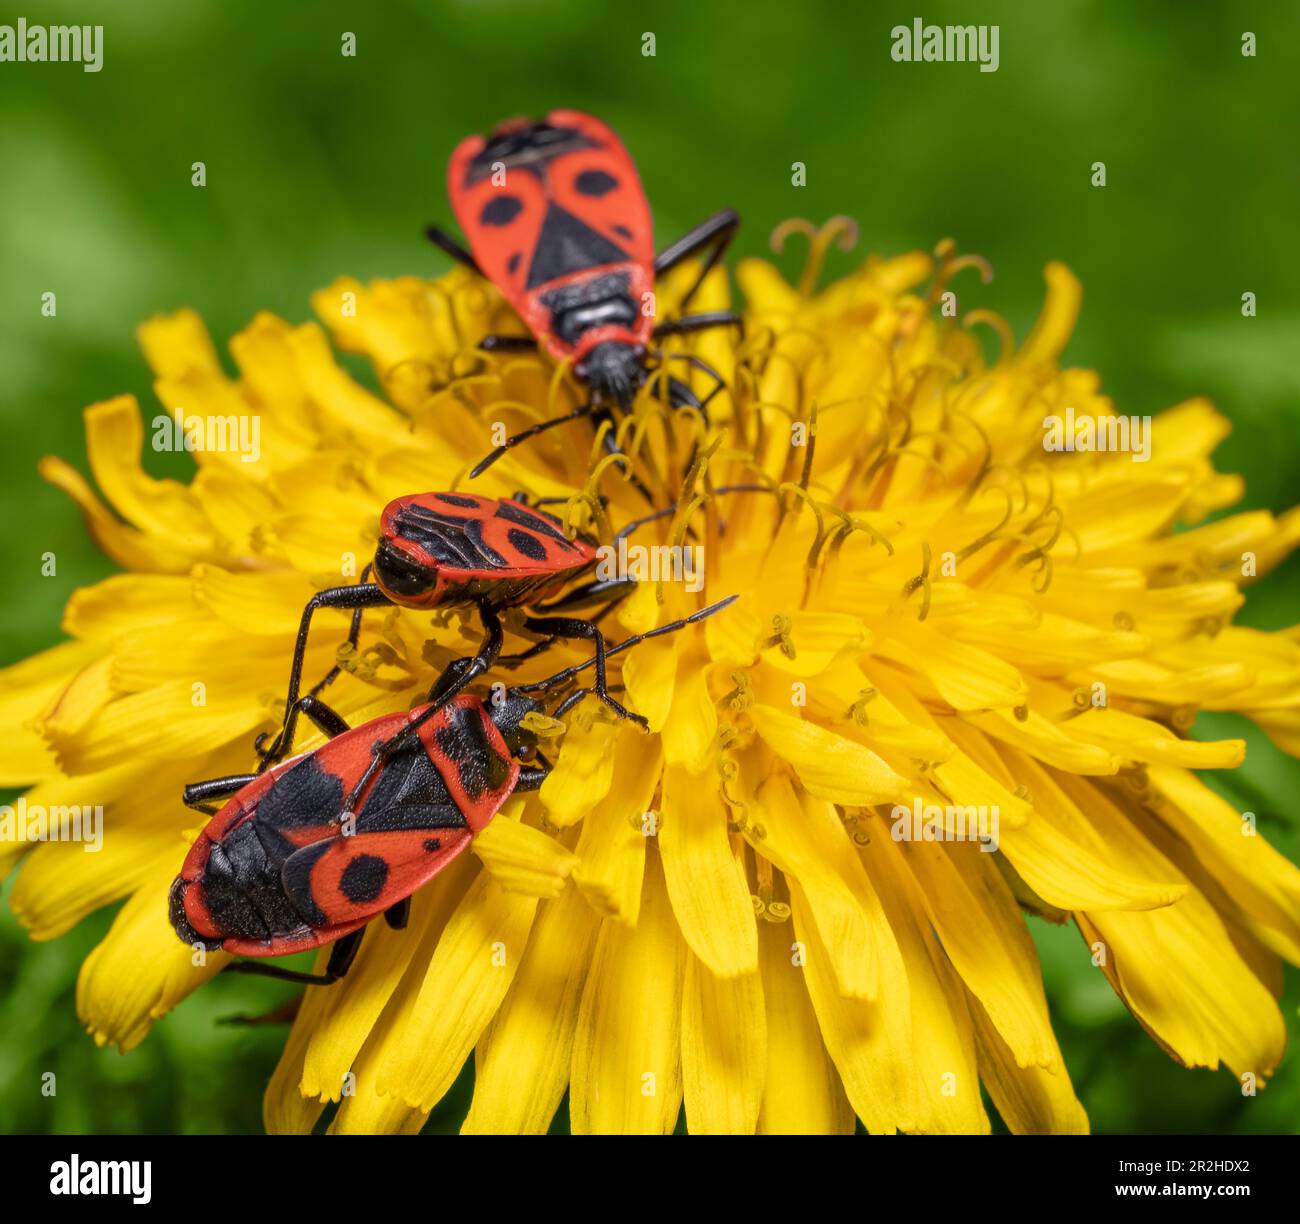 Some firebugs on a blooming yellow dandelion flower Stock Photo